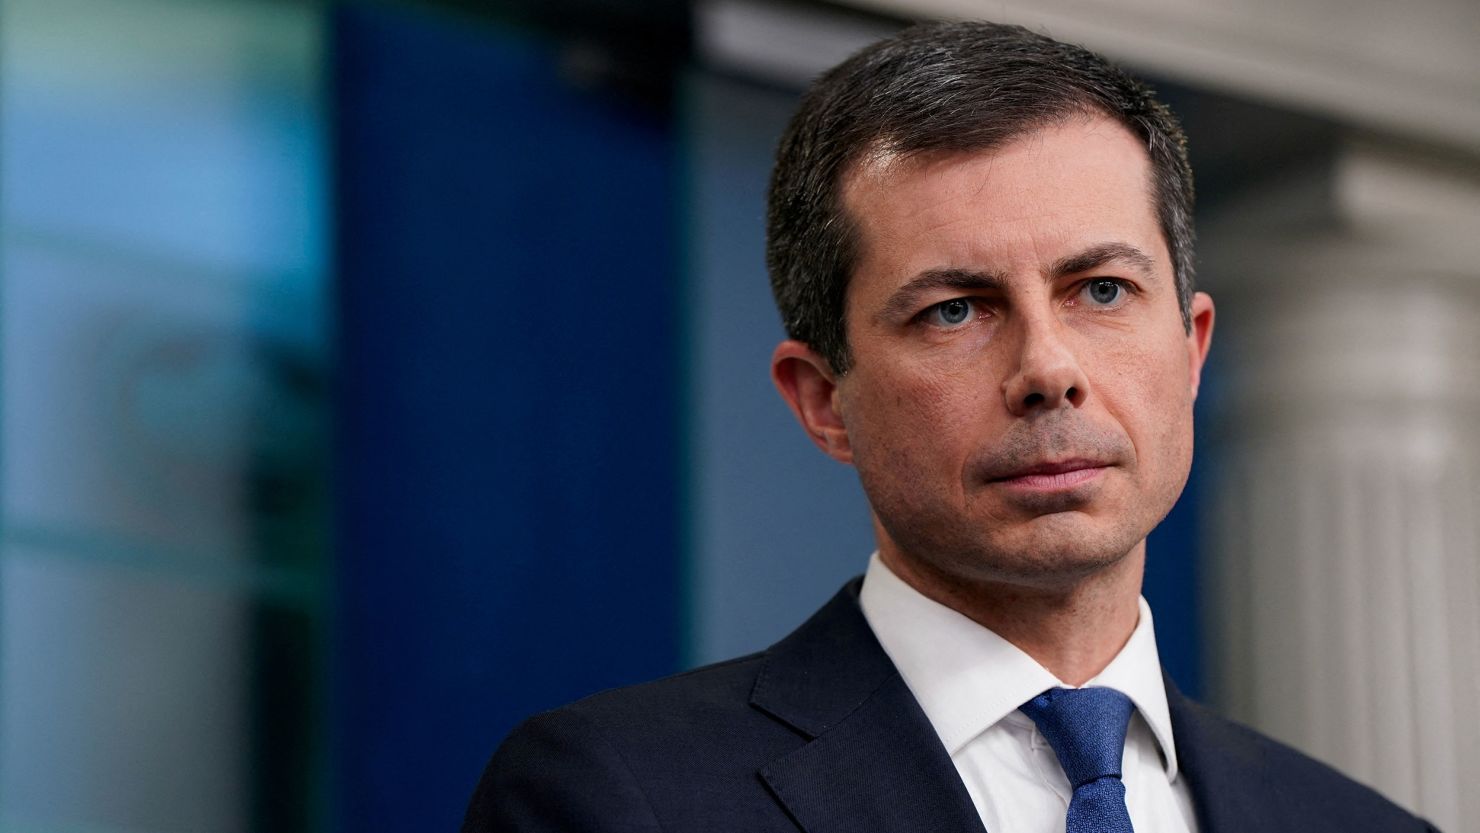 File photo of U.S. Secretary of Transportation Pete Buttigieg. The secretary attended the annual African American Mayors Association Conference to discuss new infrastructure projects.